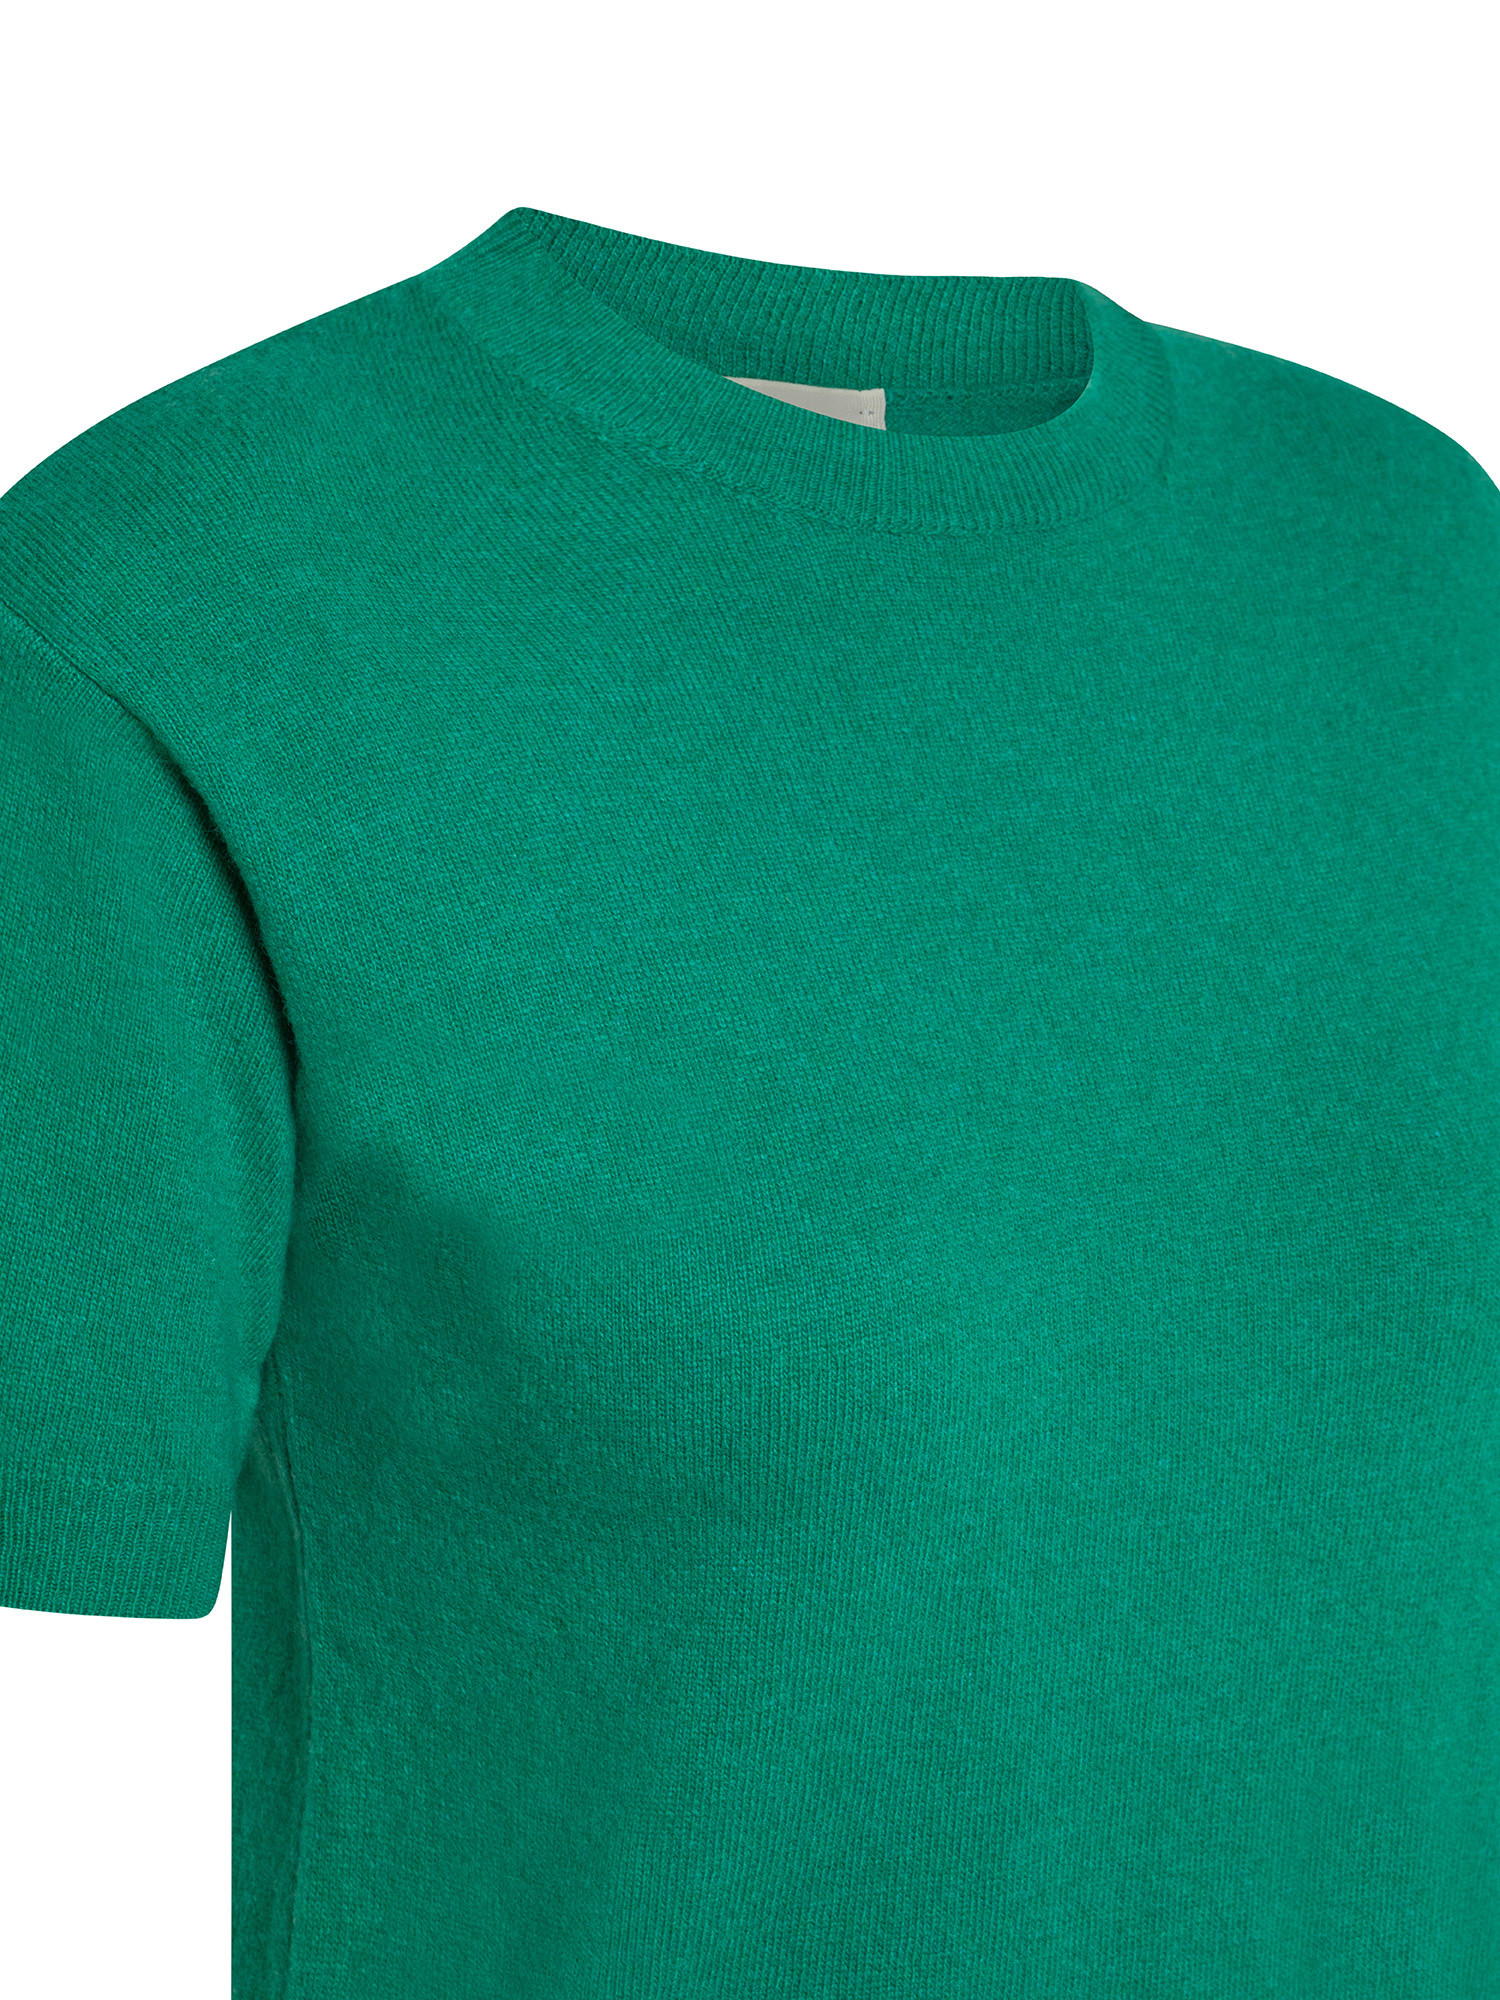 K Collection - Crewneck sweater, Emerald, large image number 1